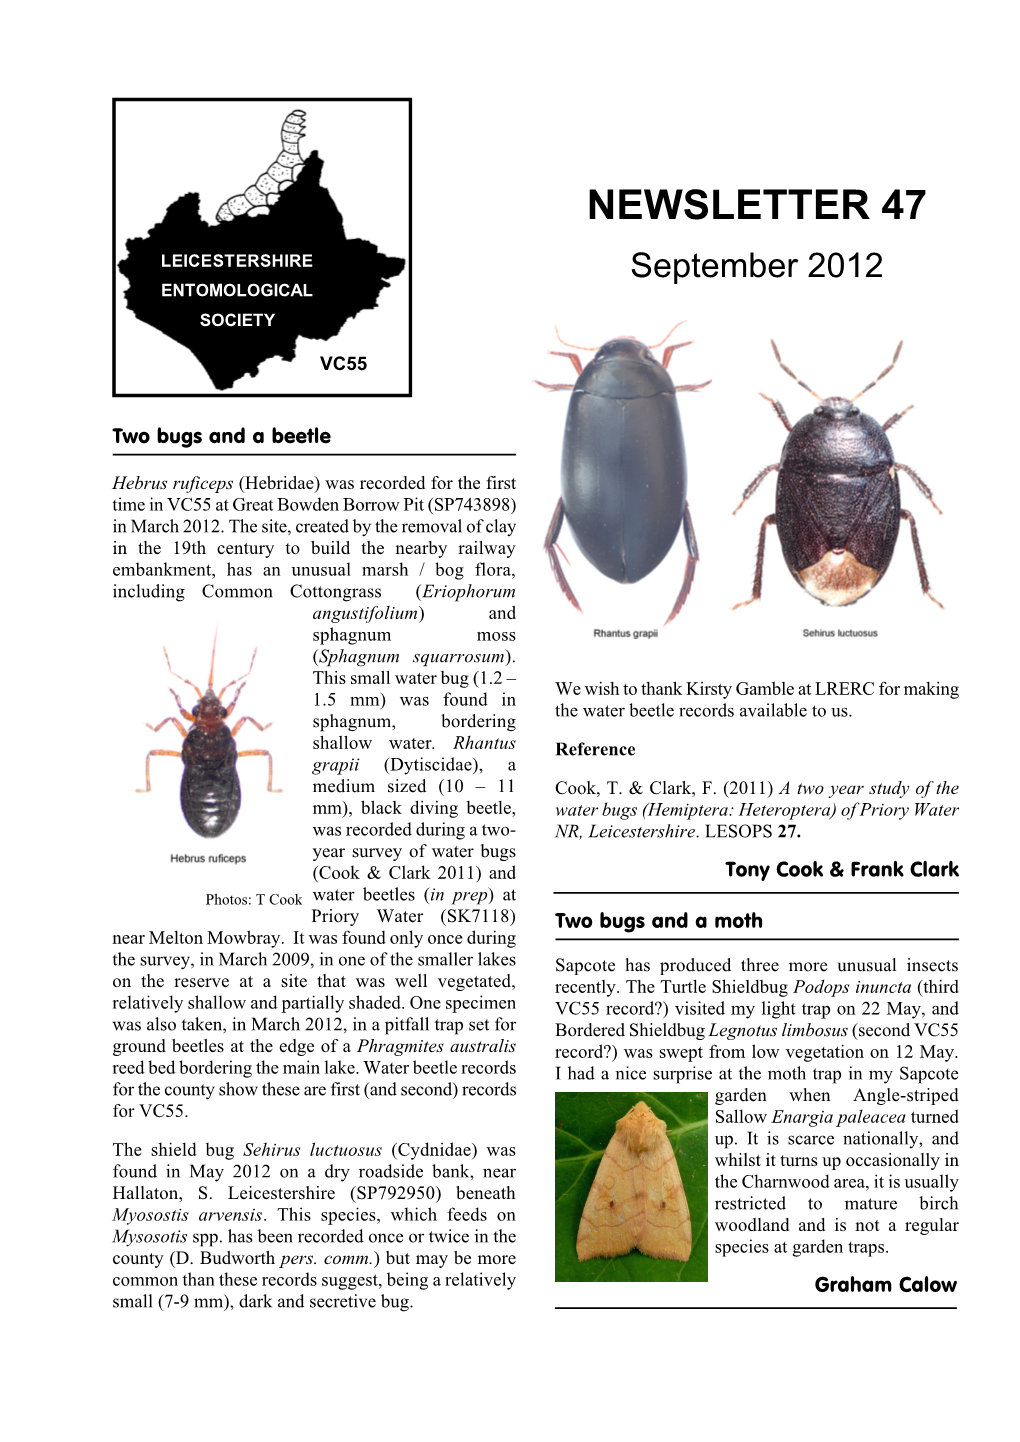 Newsletter 46) and the 16 Hinckley Road, Dadlington Loughborough Naturalists’ Club Spiders of Leics